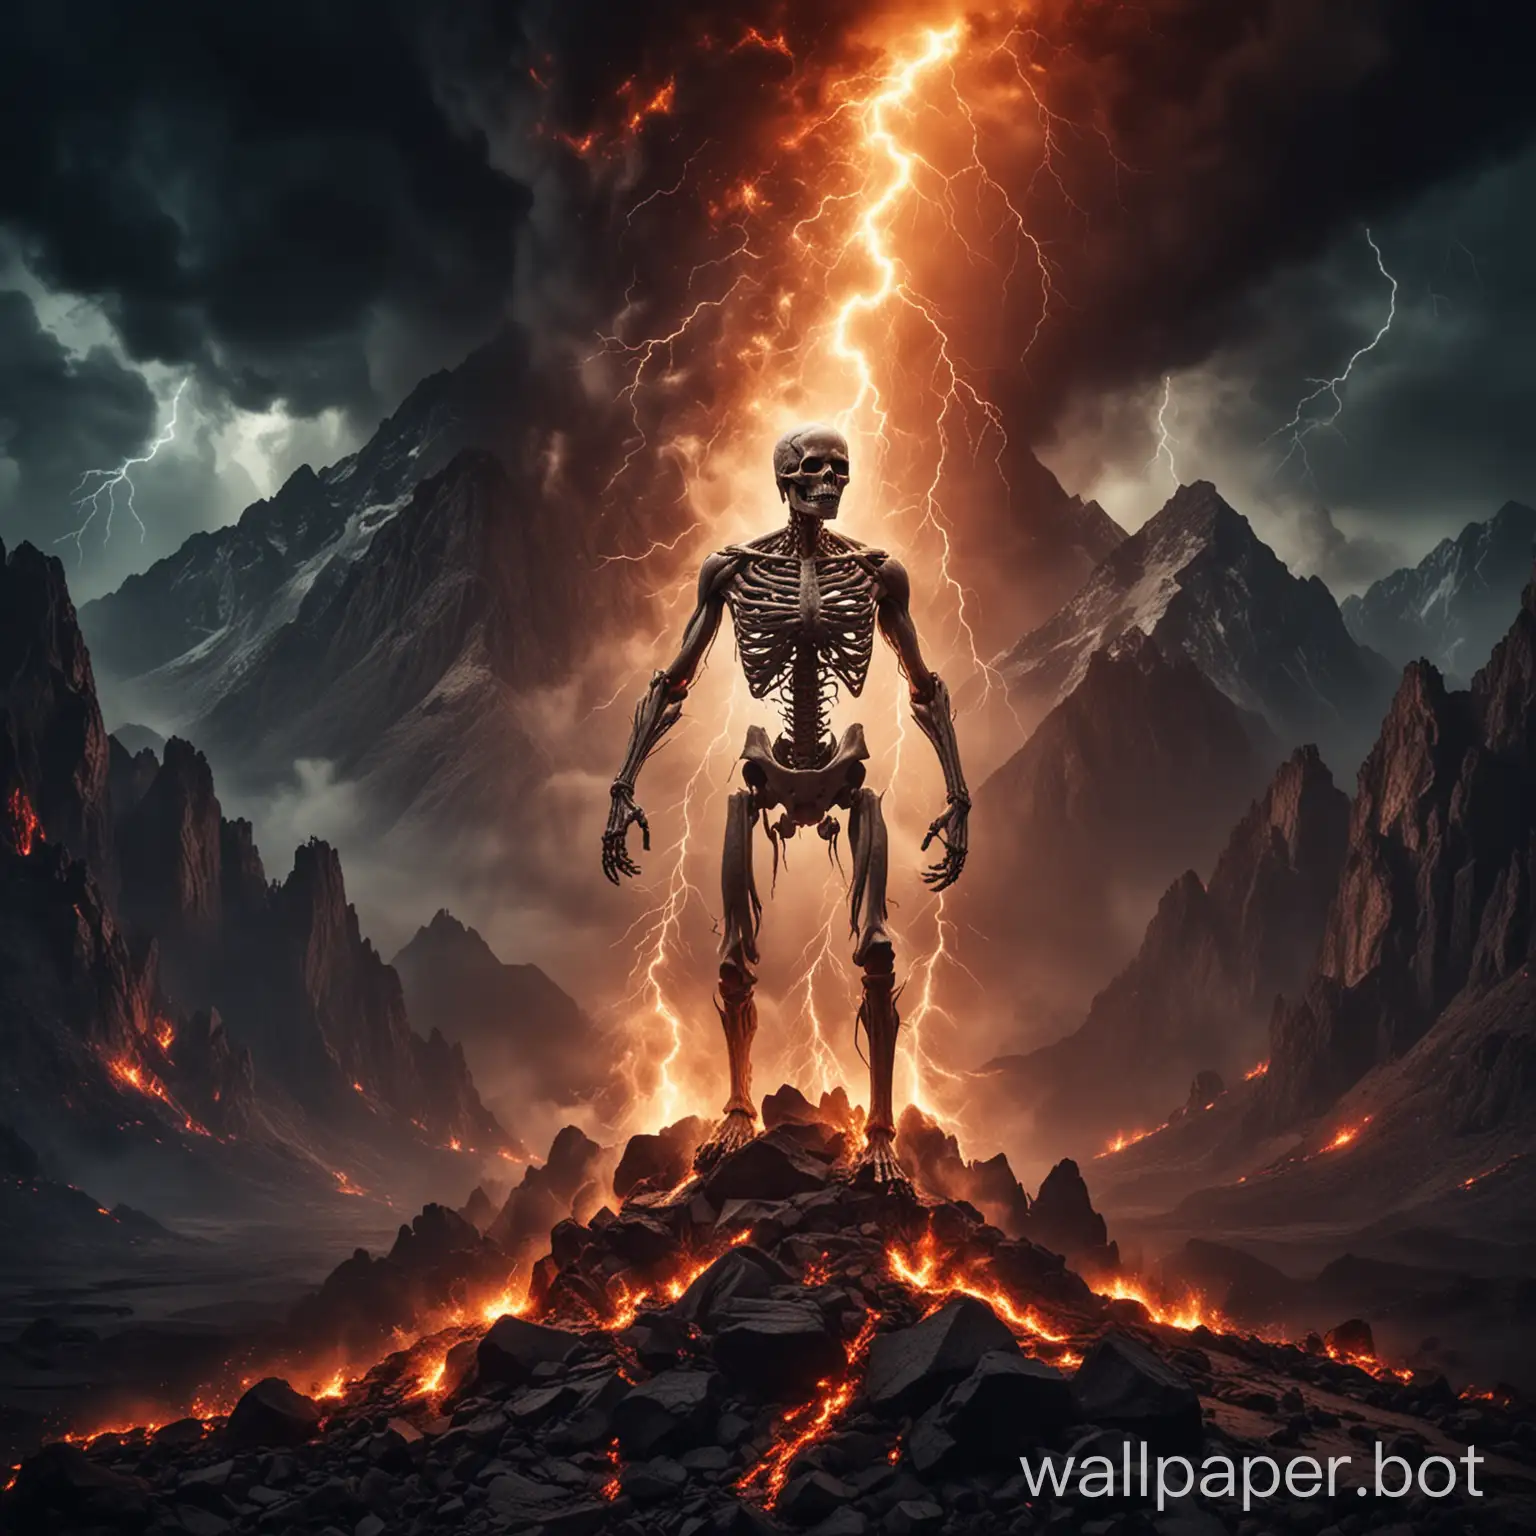 Eerie-Skeleton-Amidst-Fiery-Mountains-and-Lightning-Storm